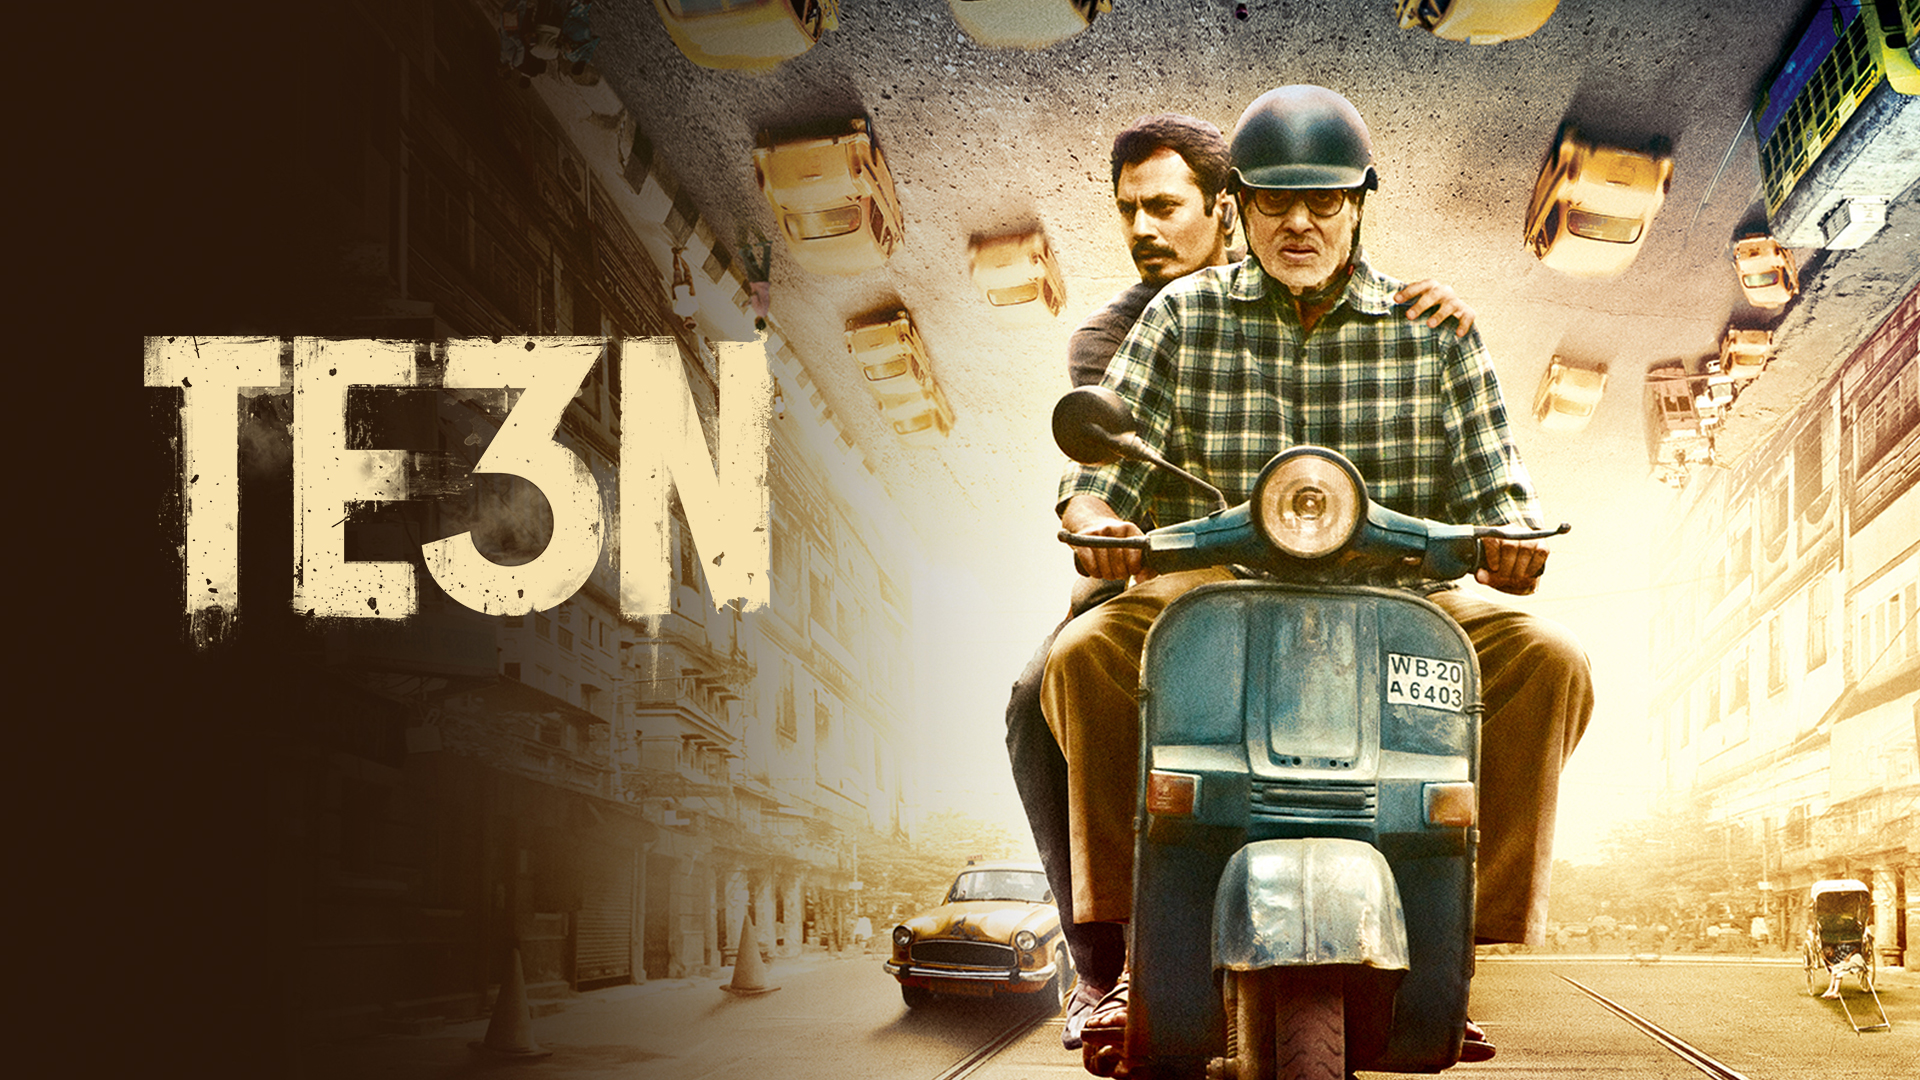 chris hohler recommends te3n movie online hd pic